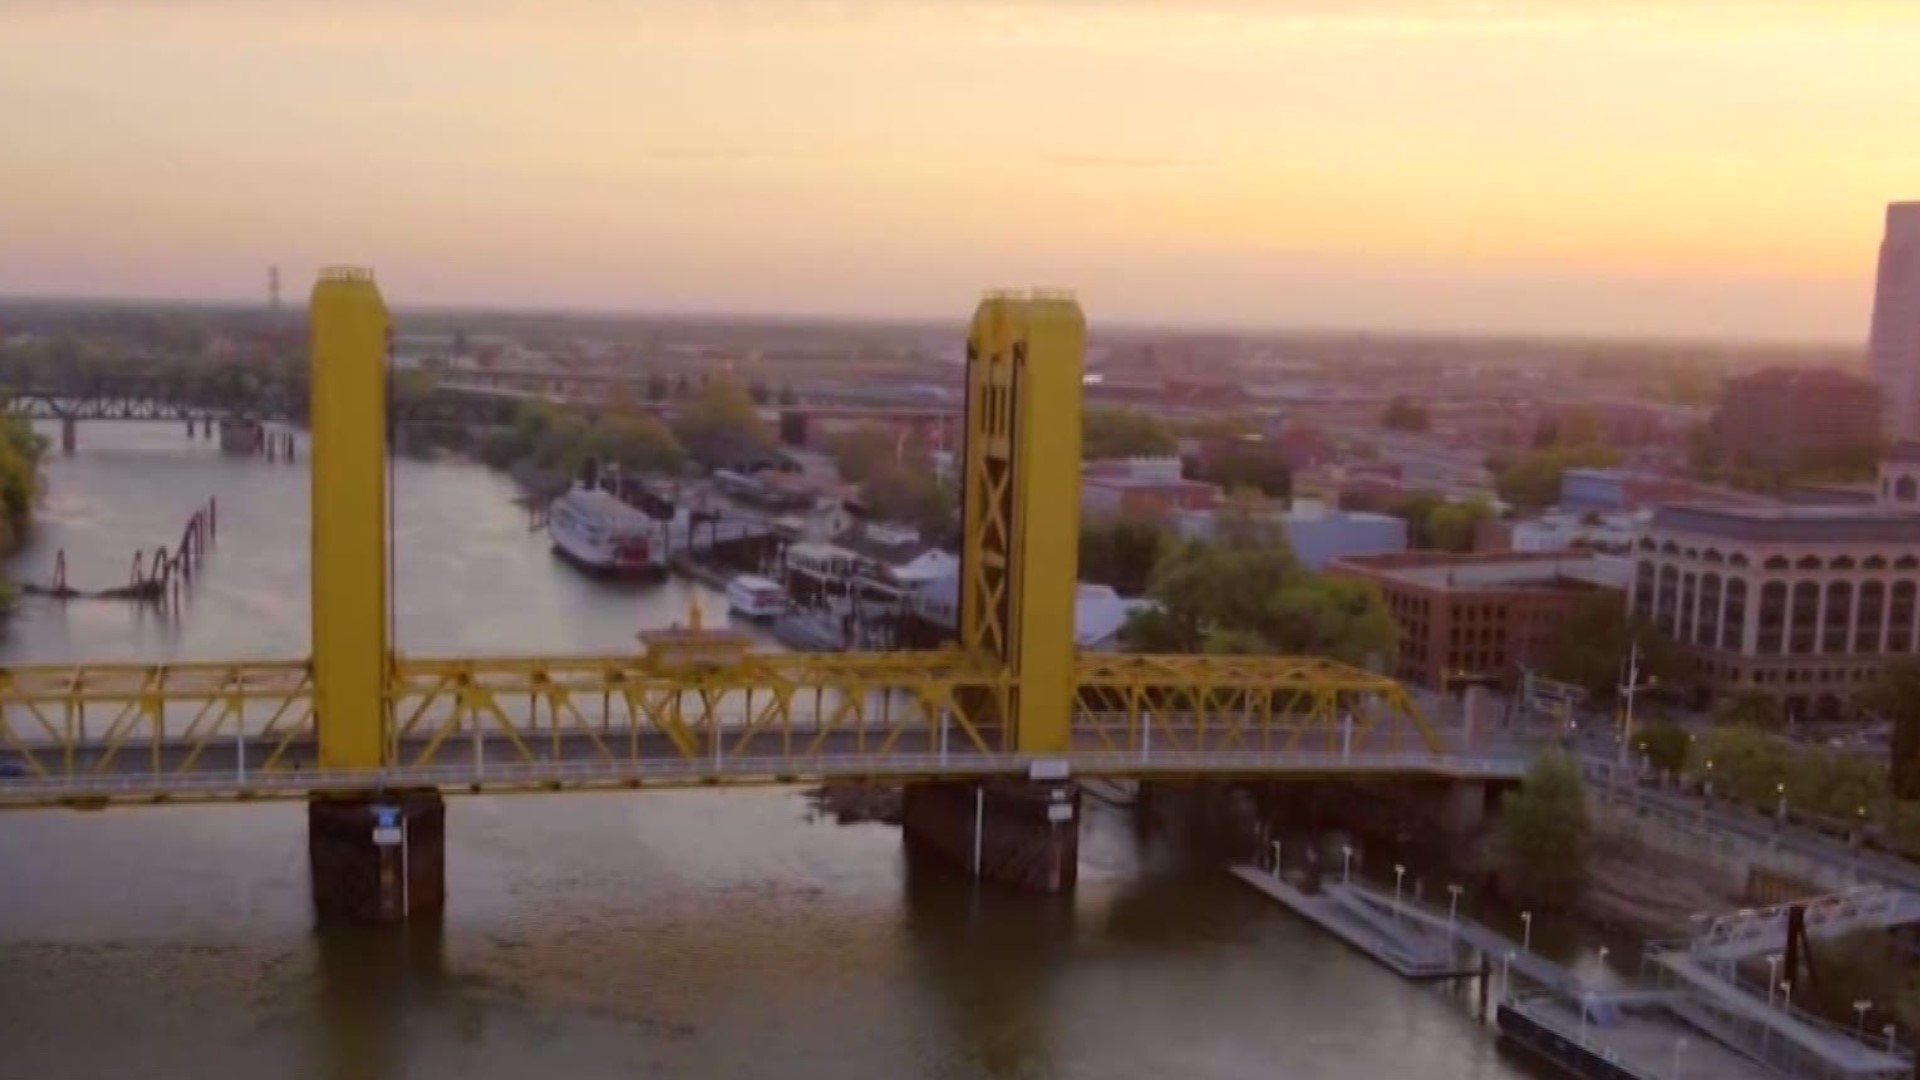 The Tower Bridge in Sacramento. You can't miss it. Since 1935 it's connected Sacramento to Yolo County. It's been painted several times with many colors. Now, it's Metallic Gold. Why?